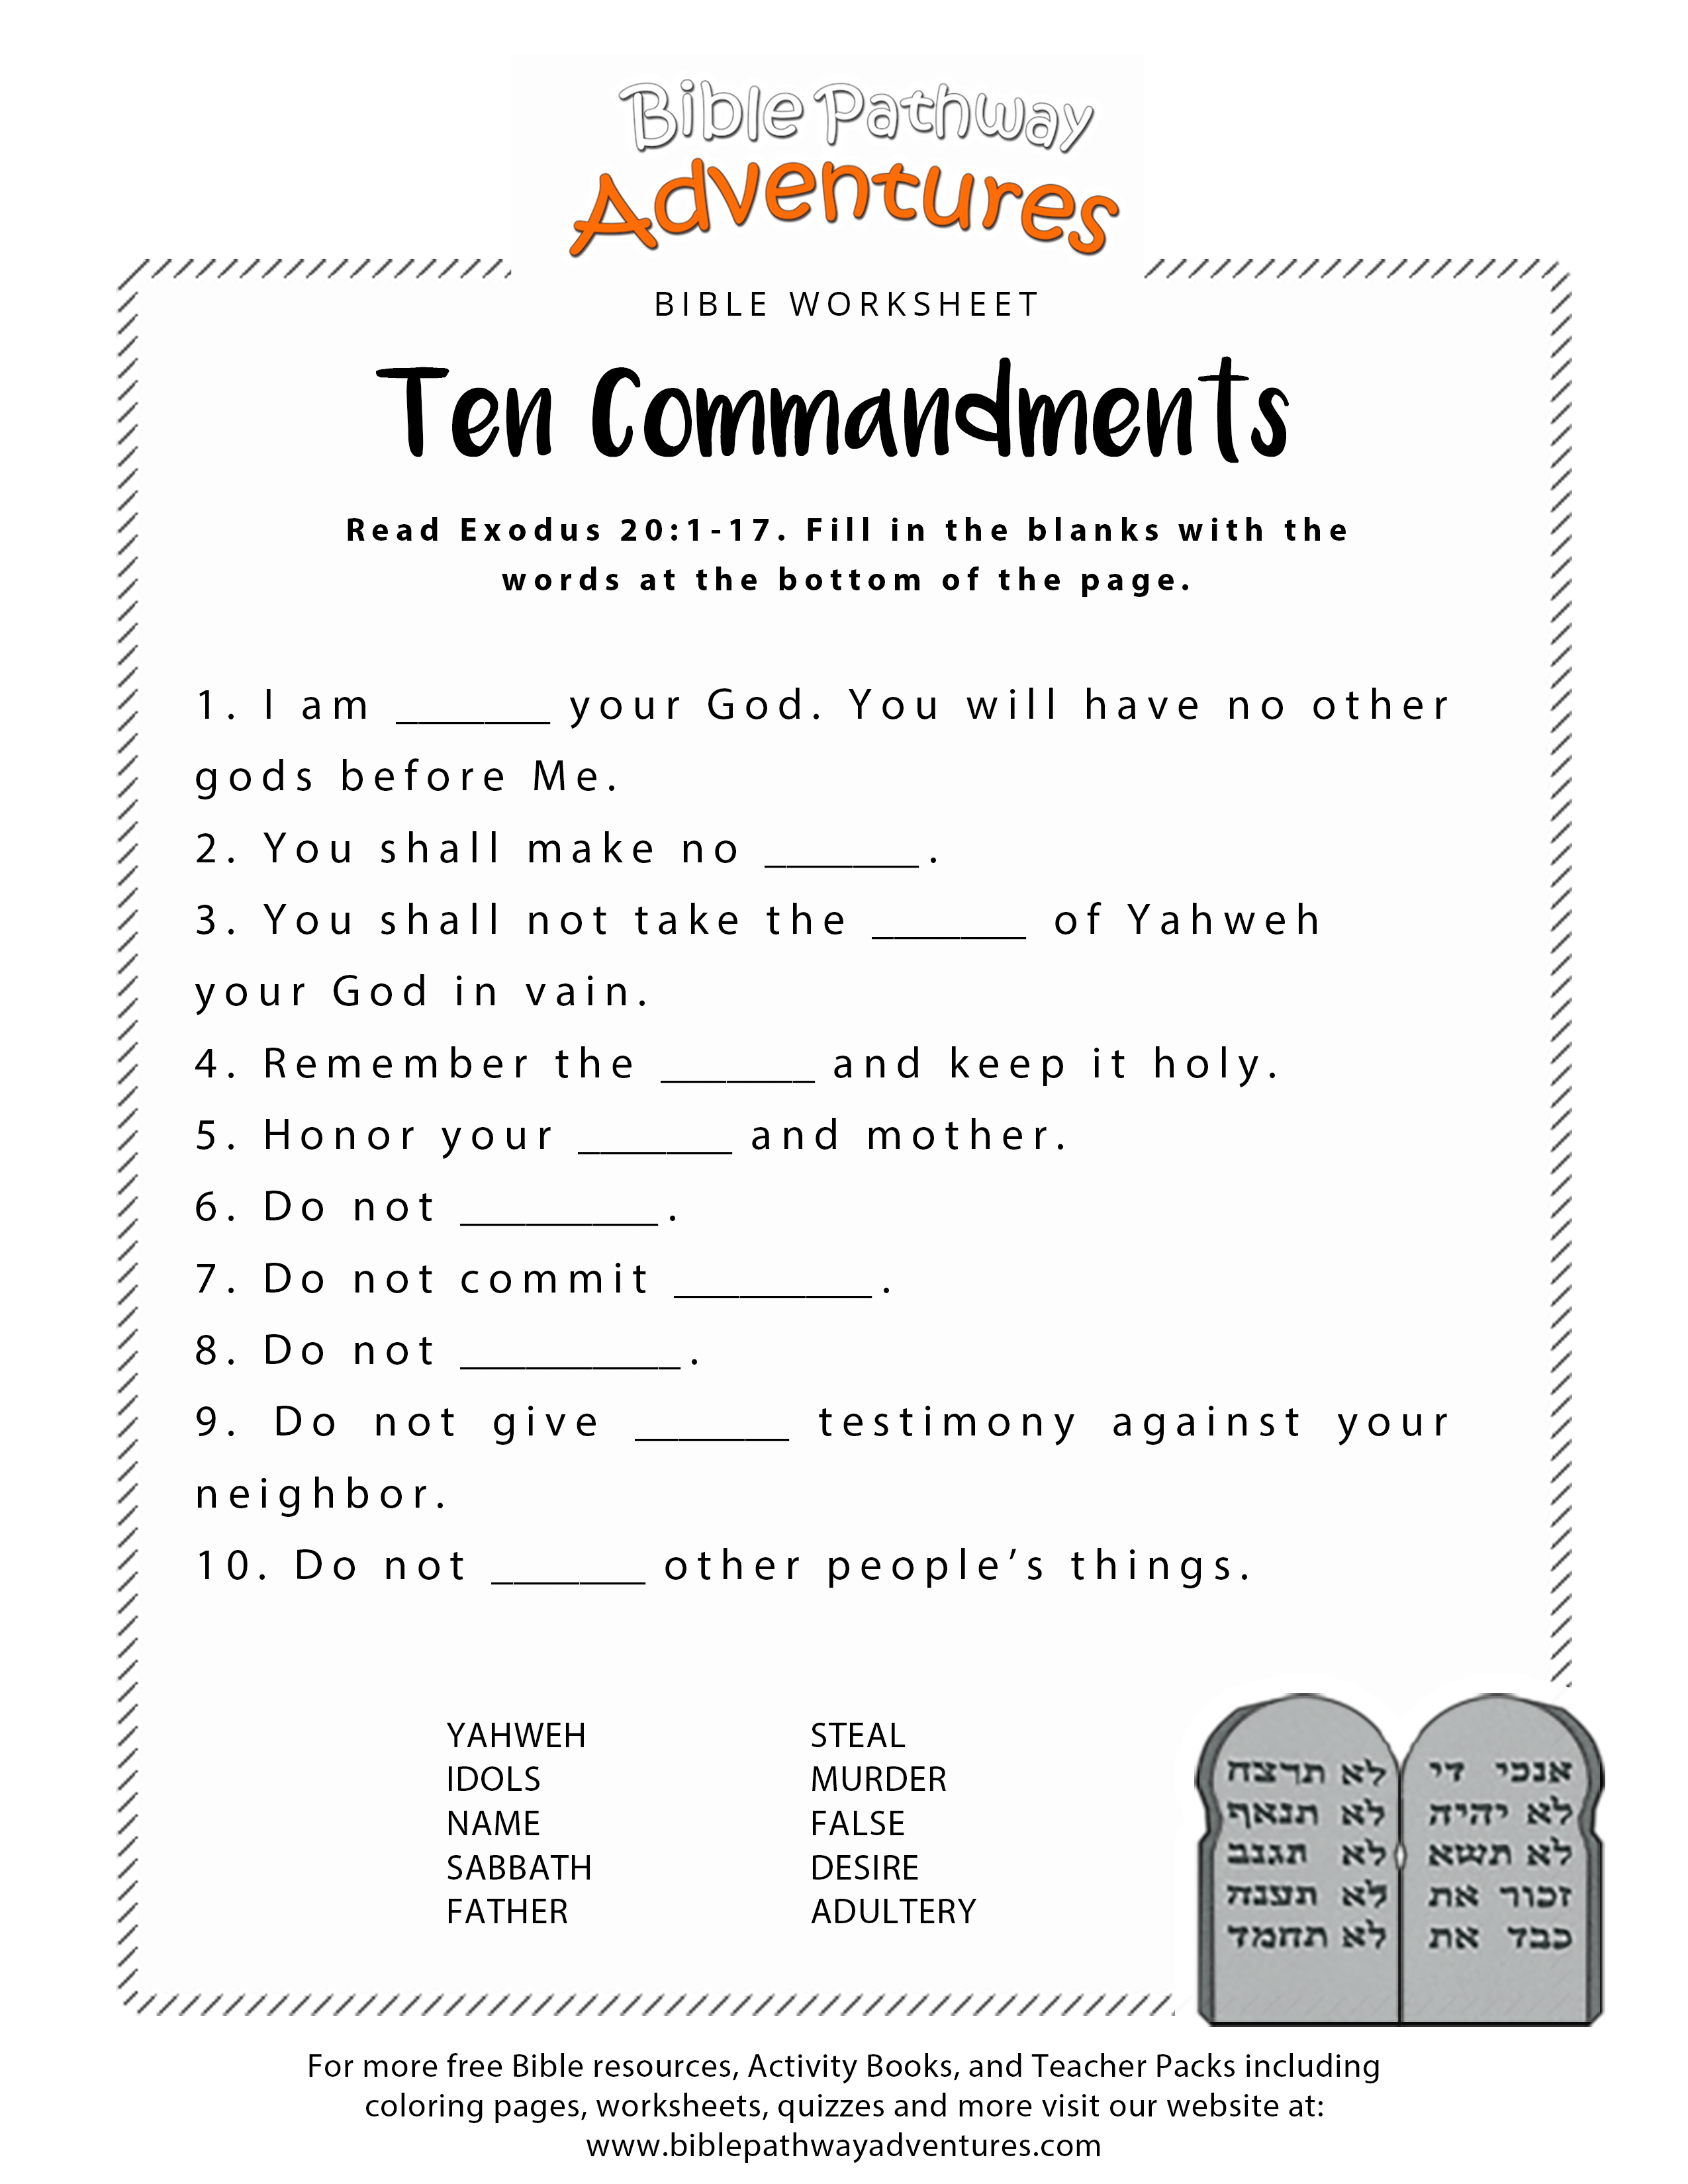 Free Printable Bible Worksheets For Youth – Worksheet Template - Free Printable Bible Lessons For Youth